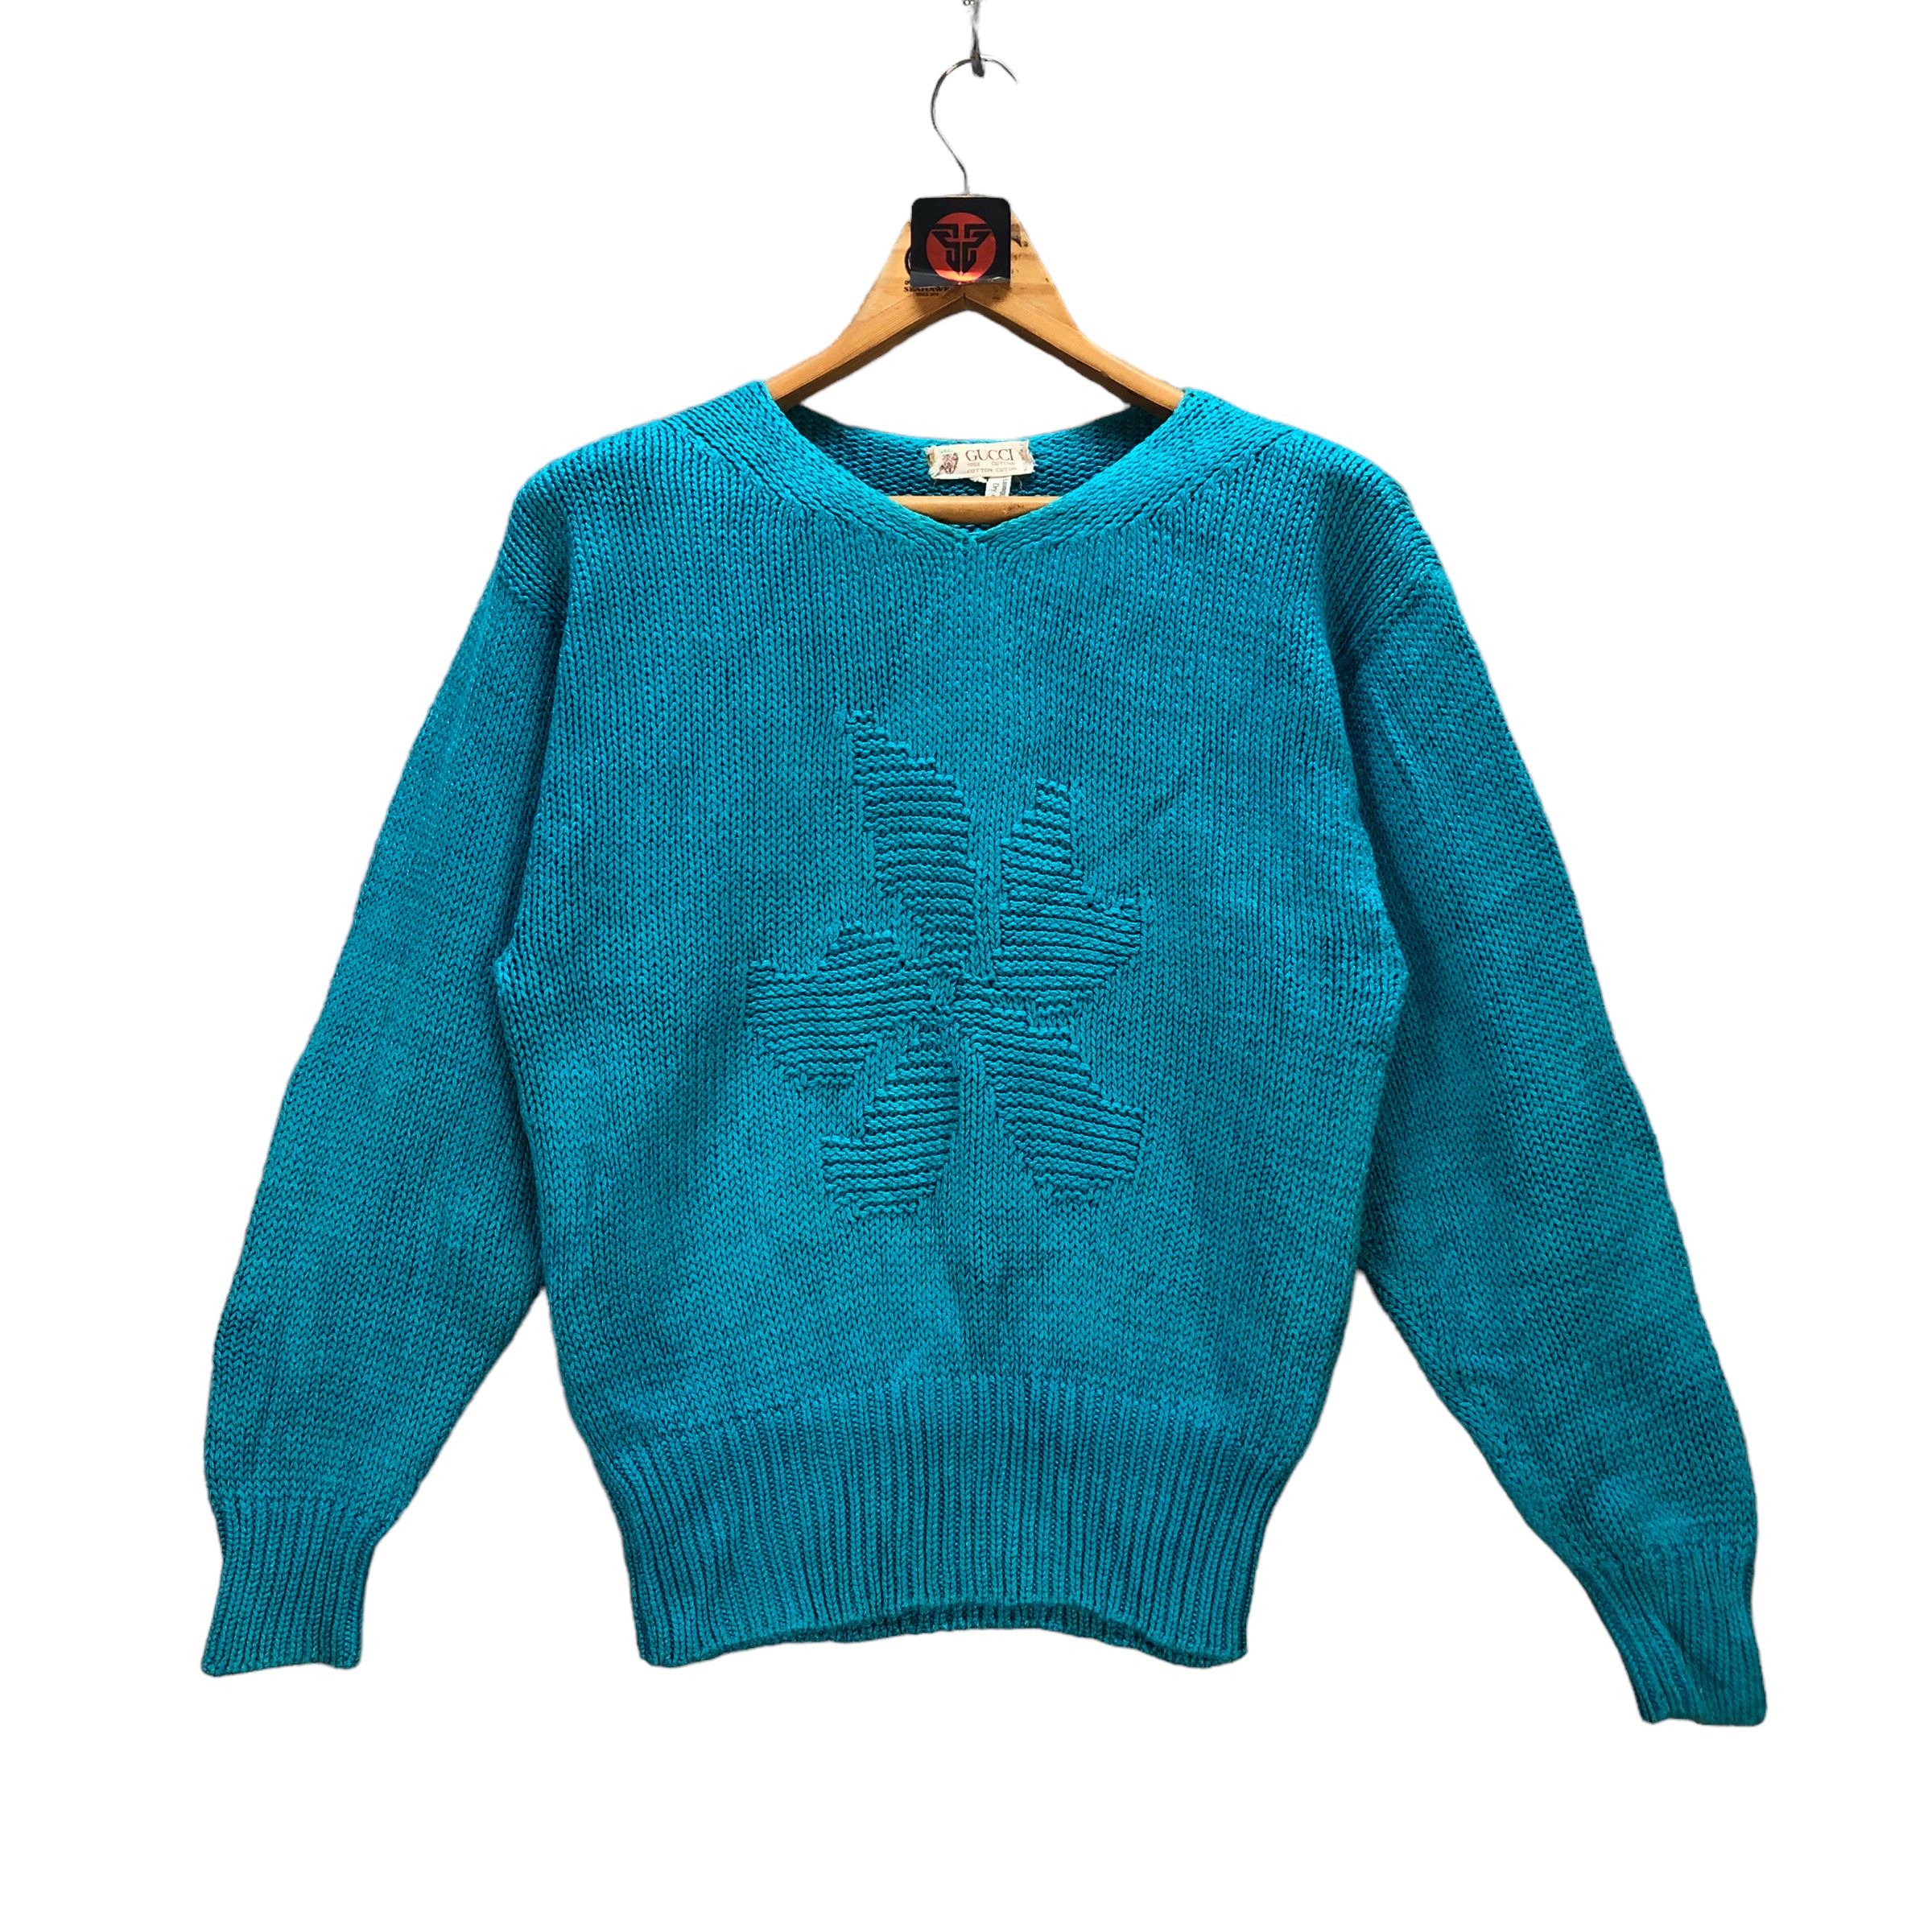 80's GUCCI CABLE KNIT SWEATER #6993-104 - 1